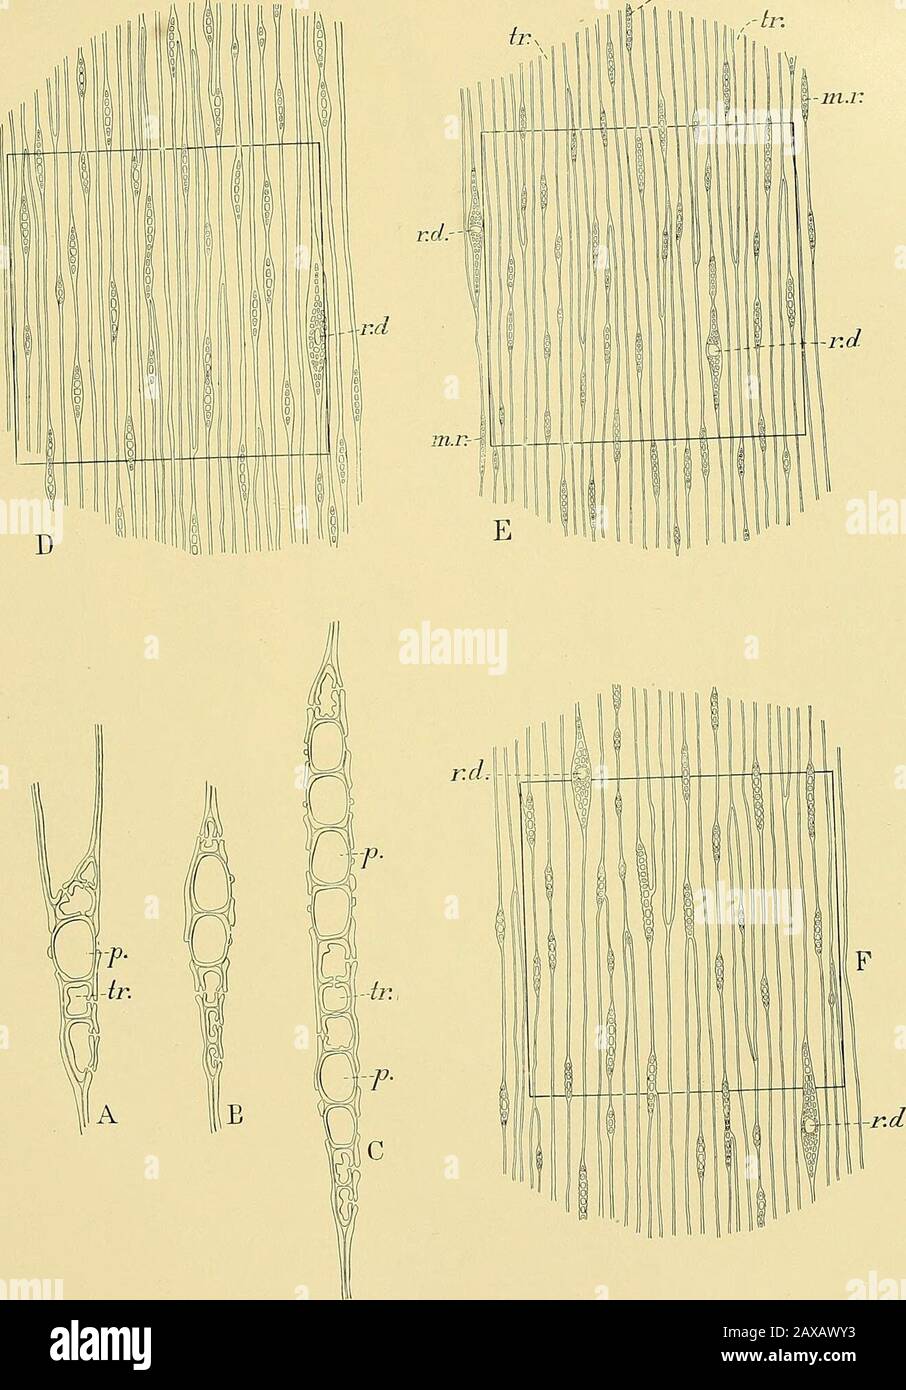 Report upon the forestry investigations of the U.SDepartment of agriculture1877-1898 . Tangential Sections of Pinus t/eda, heterophylla, and glabra. A, PiNCS HKTEROPHYLLA. Radial and tangential sections of a transversethe medullary ray; p., parenehynia cells of the same B-ff, PlNUS RLADRA. S -  0-G, tangential o^v^wwuo ^^i ...^«v*—j .„^^,-,- . H, Pinus tjuda. Tangential sections of medullary rays m oprmg and summer wooa.Original magnified s;, illustrations about »?°. medullary ray; tr., tracheids ot ^ duct; r. rf, rdsin duct; vi. , common tracheids or wood fibers,st teugenSalSon of* a trauTve Stock Photo